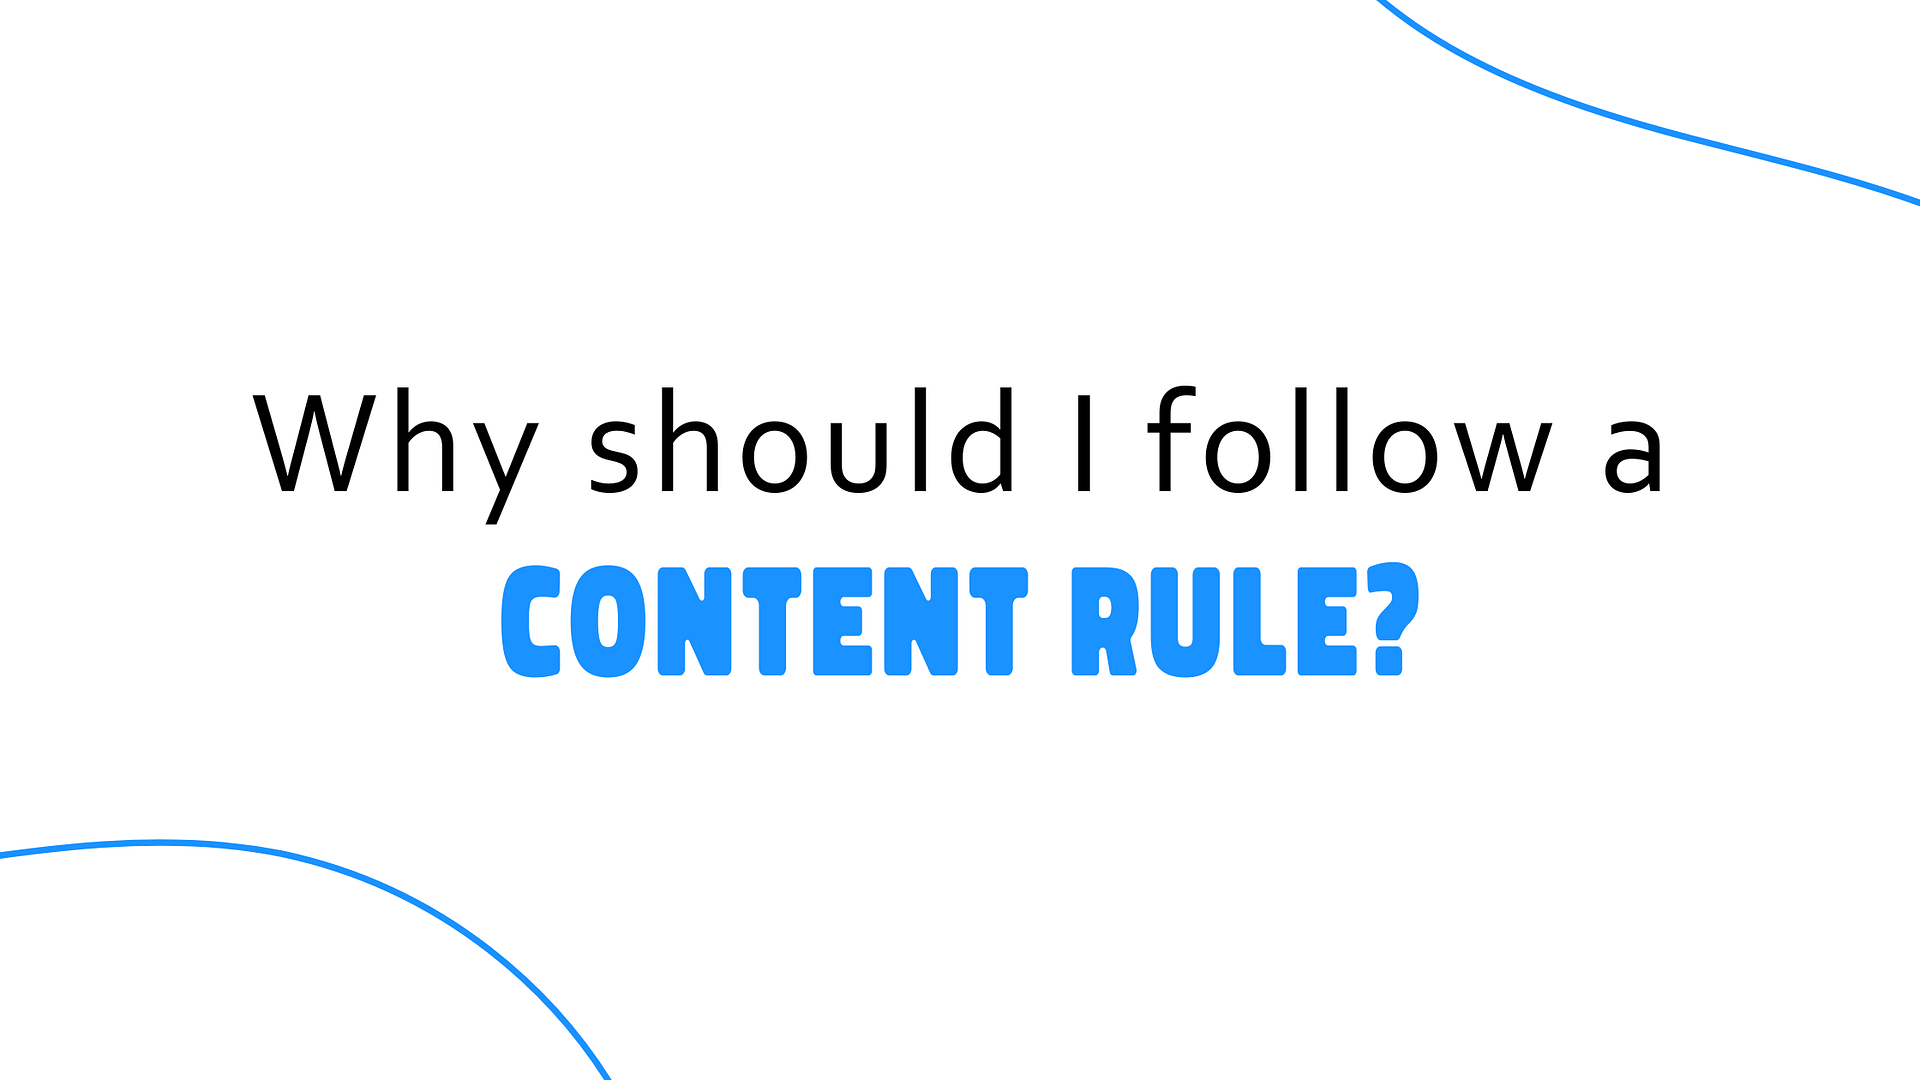 Why should I follow a content rule?